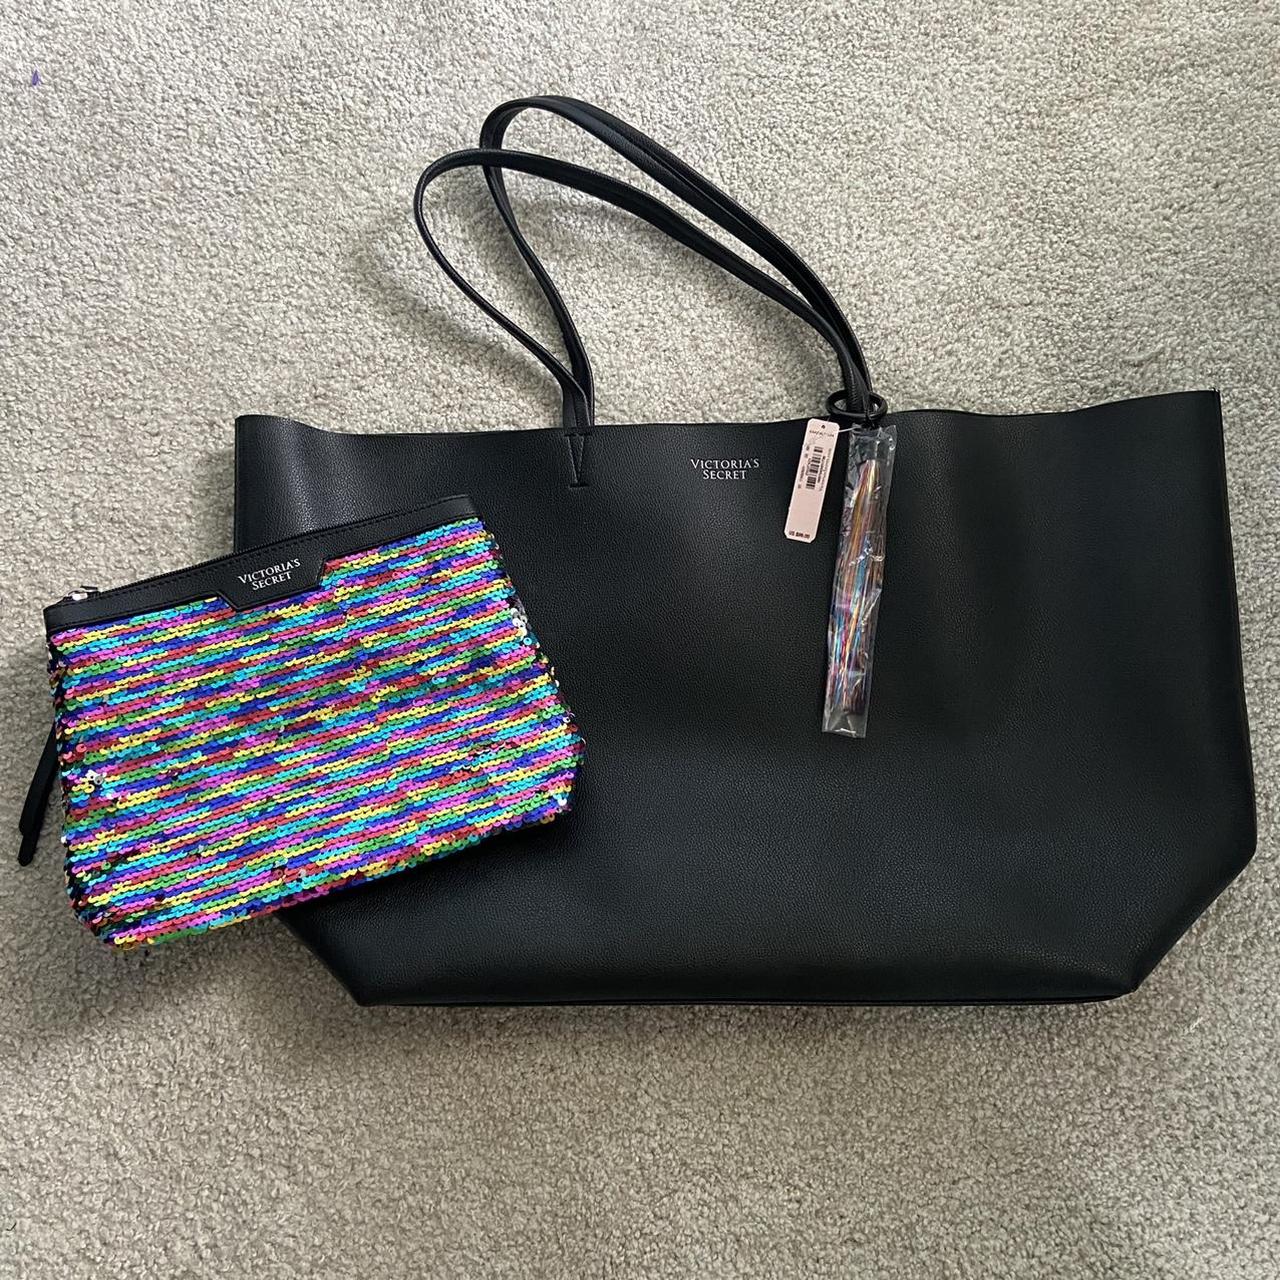 NWT Victorias Secret Tote and Makeup Bag, Shipping